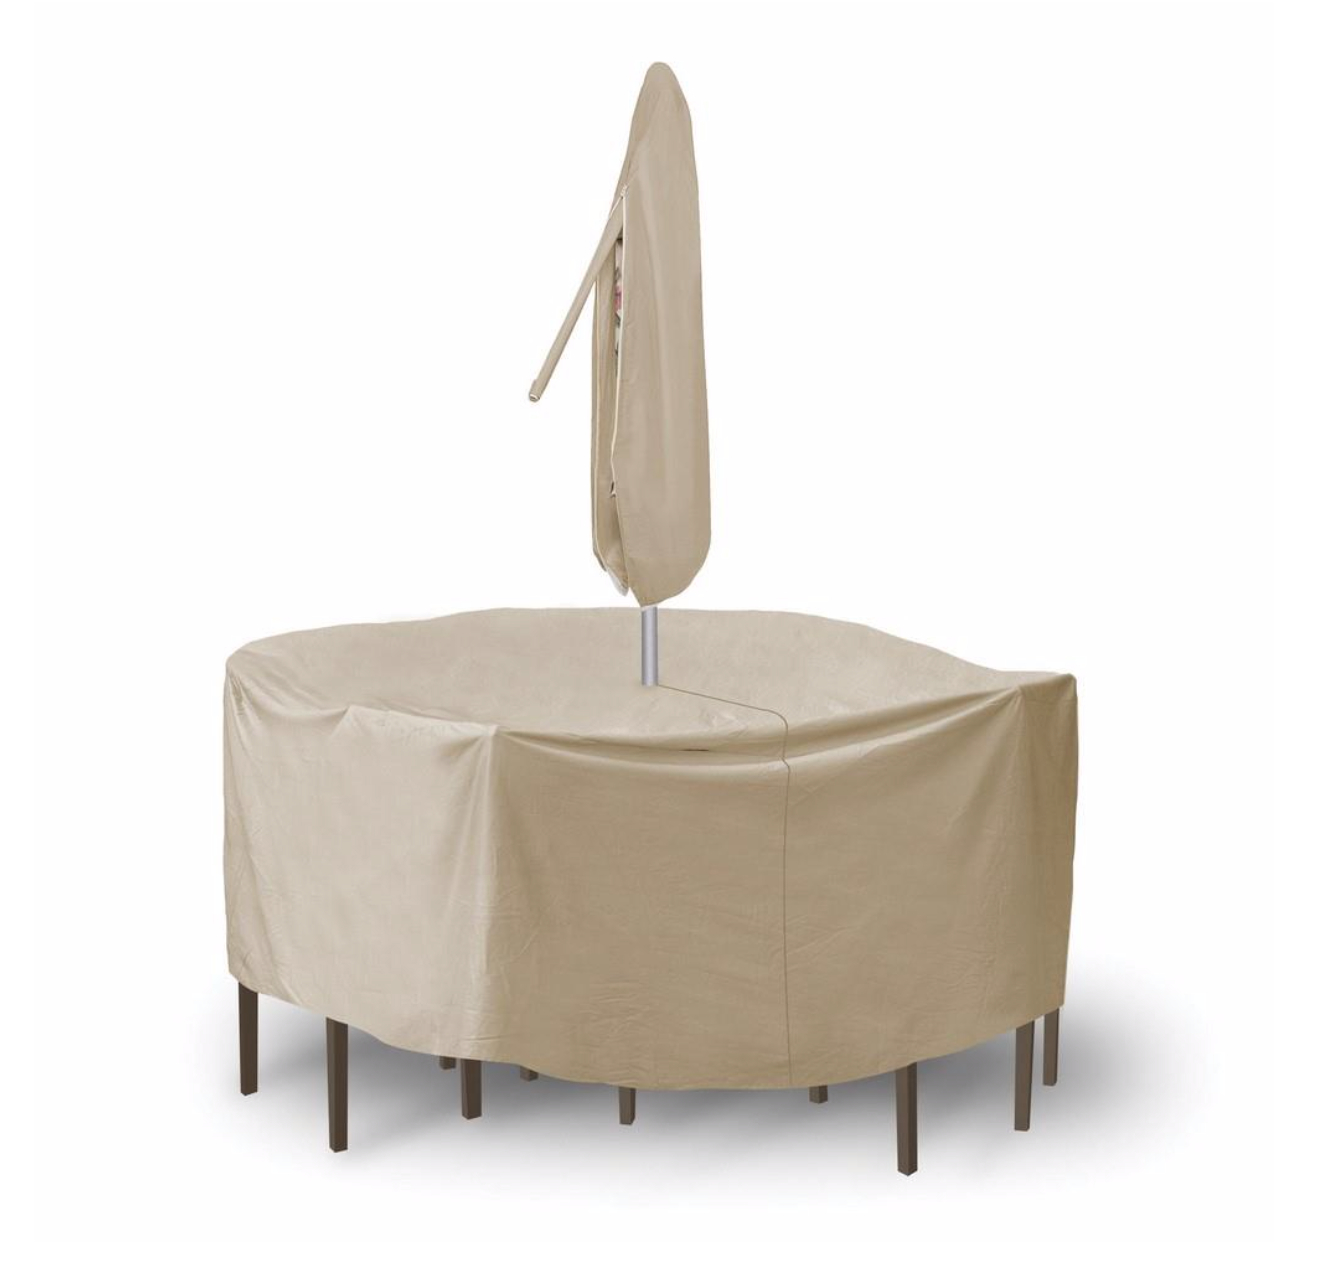 92 Round Table With Chairs Combo Cover Without Umbrella regarding measurements 1338 X 1282